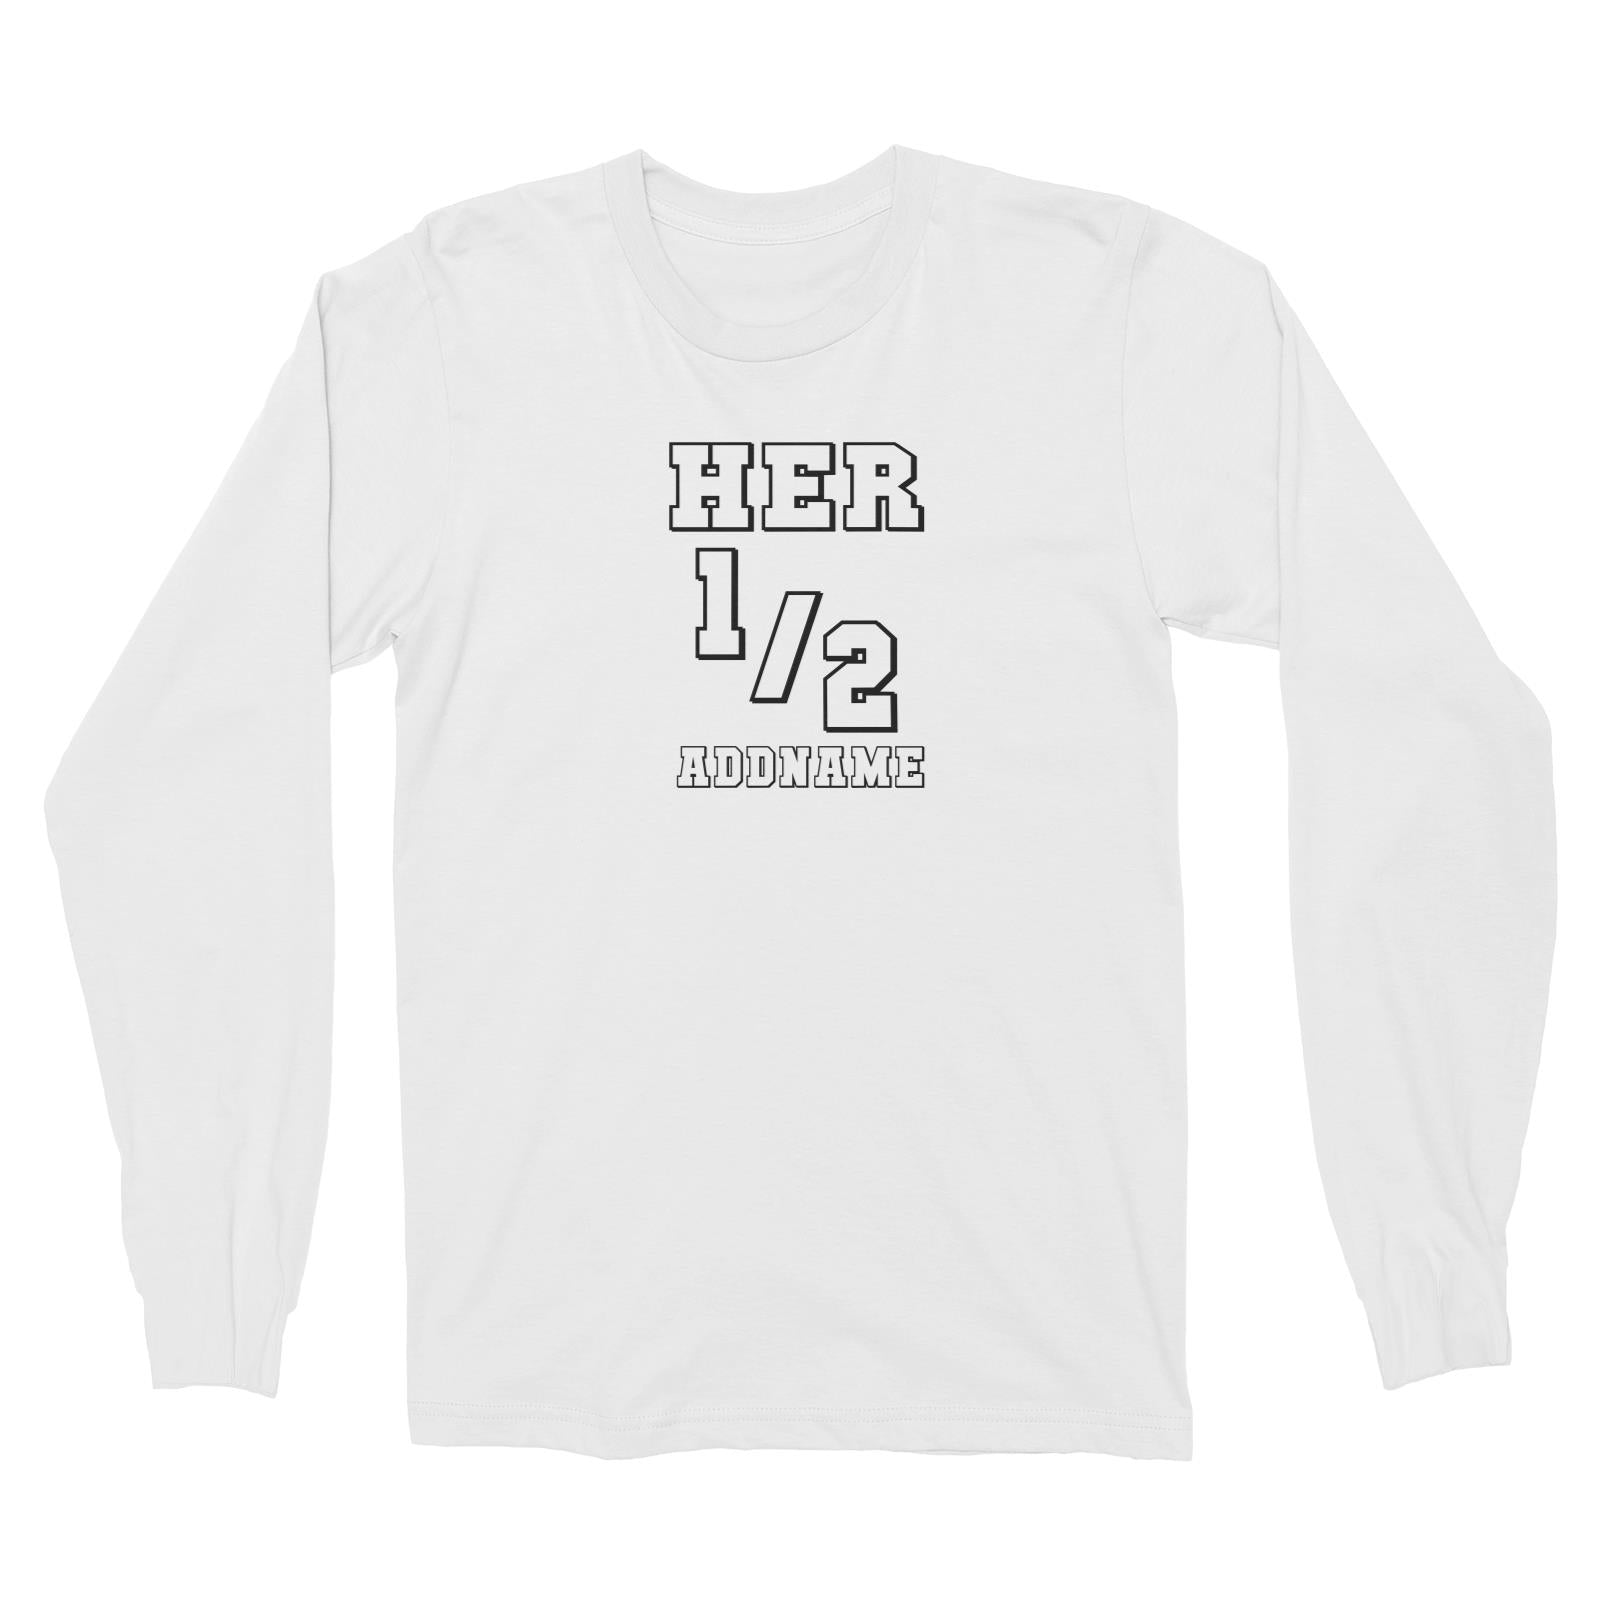 Couple Series Her Half Addname Long Sleeve Unisex T-Shirt